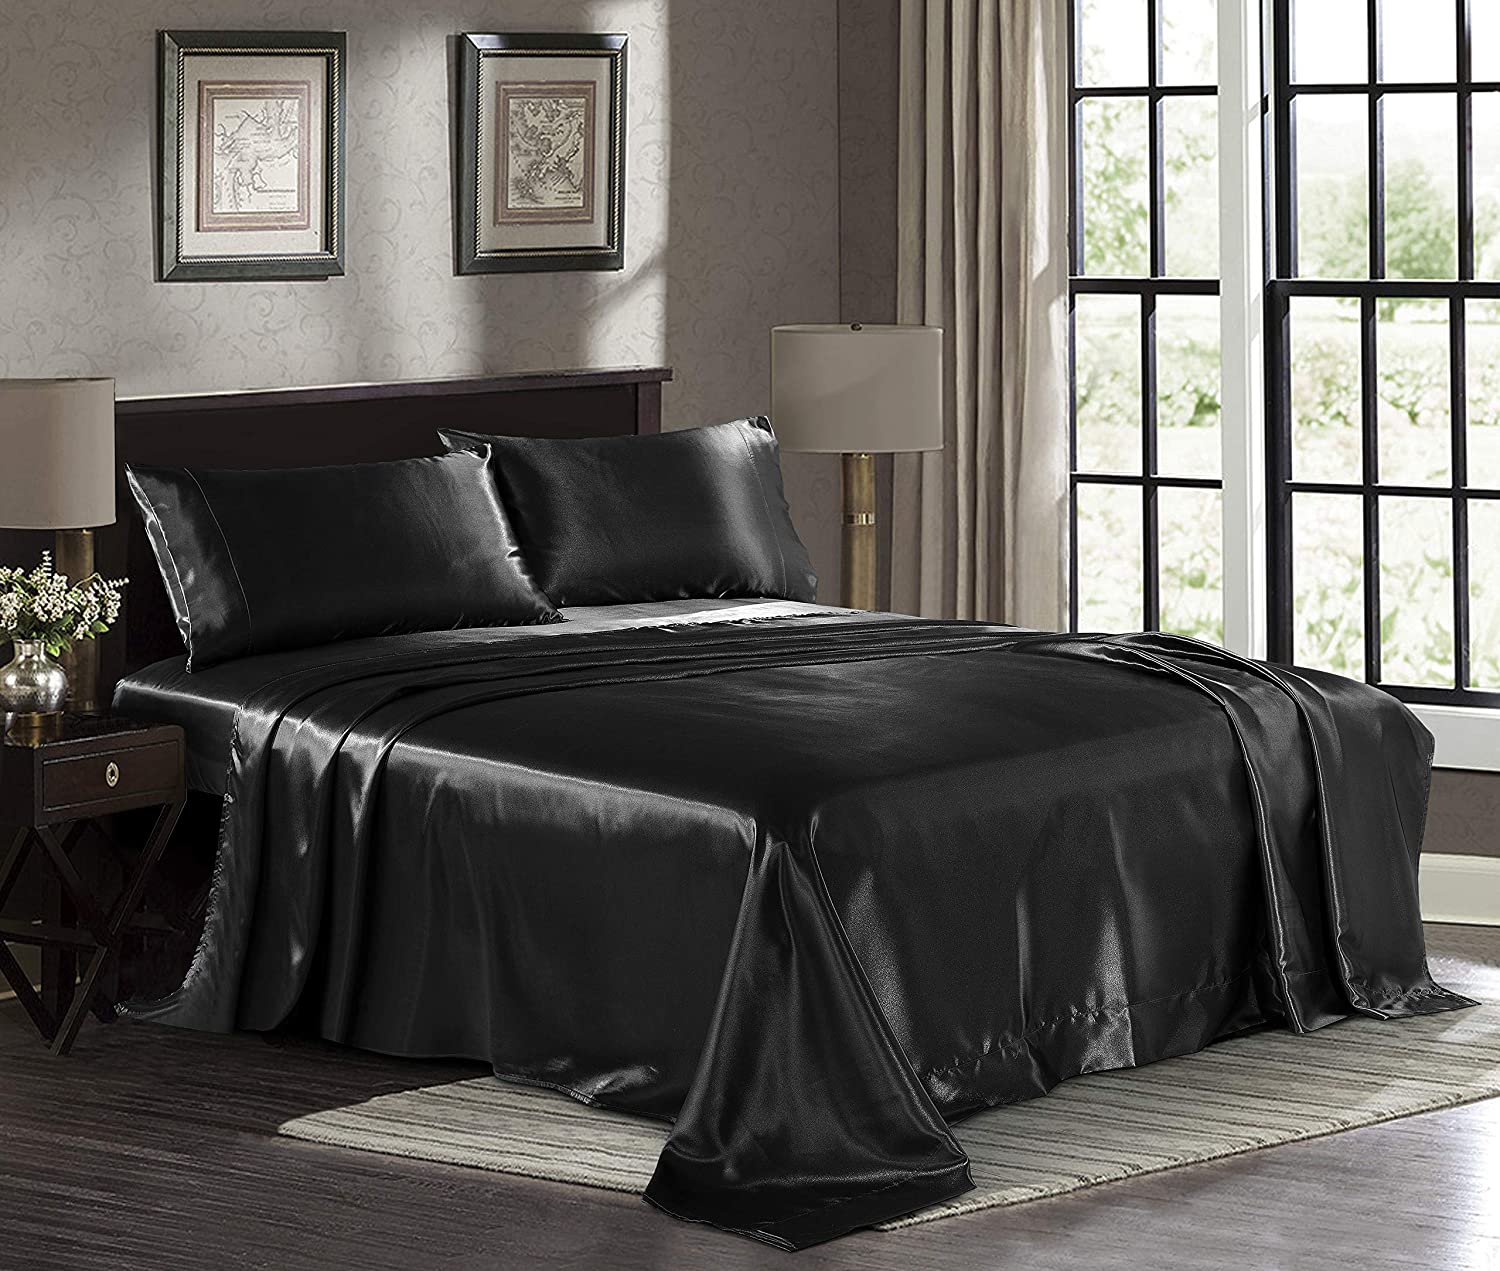 New Luxurious 100% silk charmeuse Fitted Bottom sheet King Black Deep Pocket